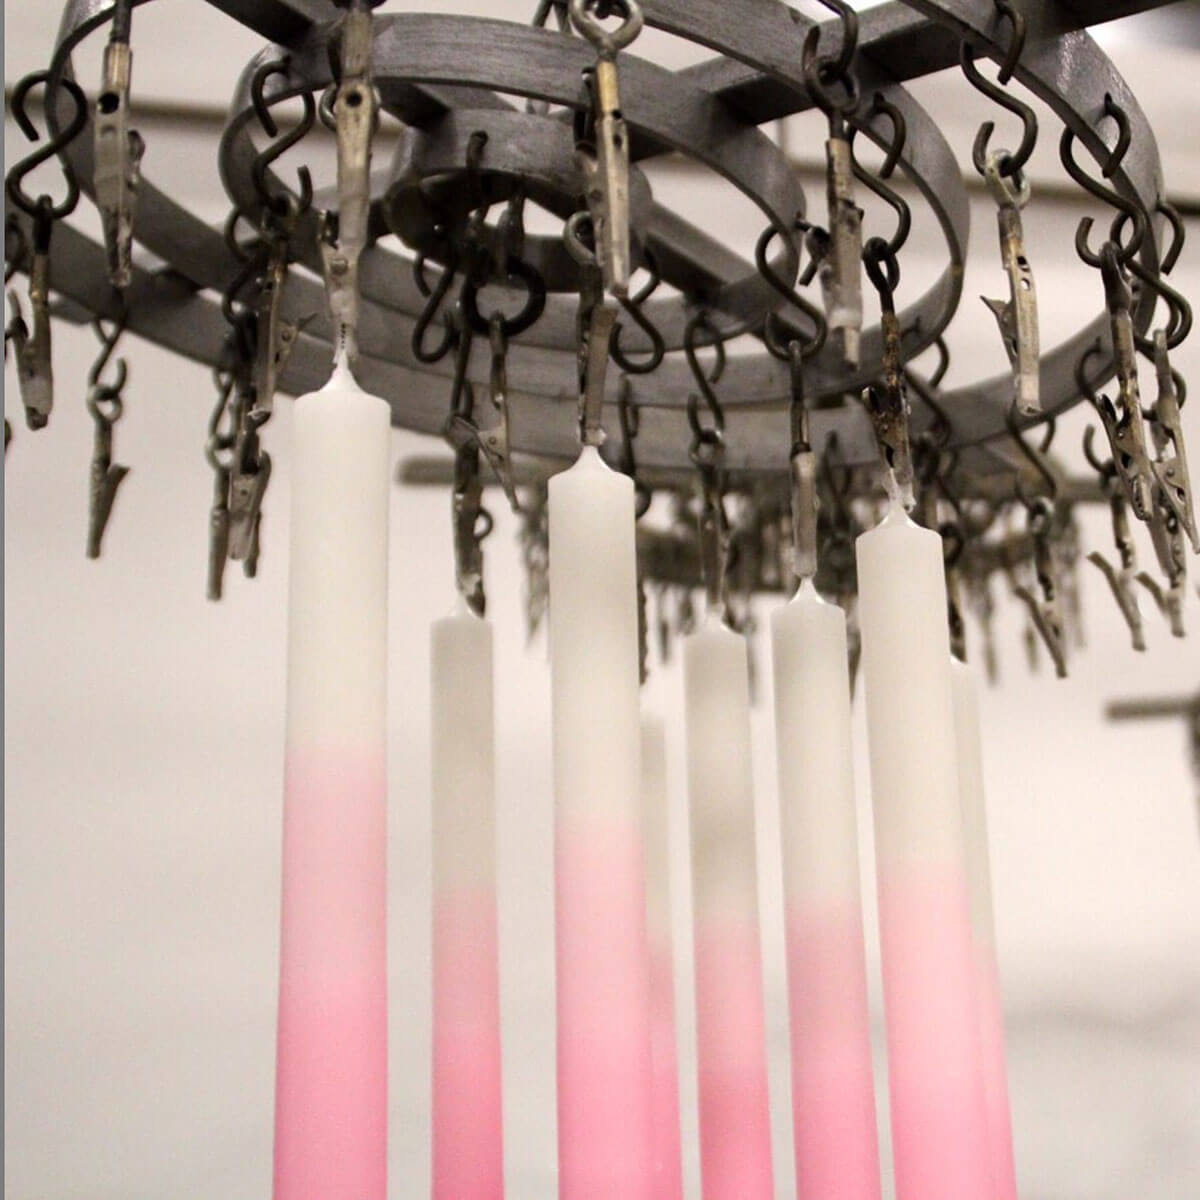 Gradient Candle – Hot Pink